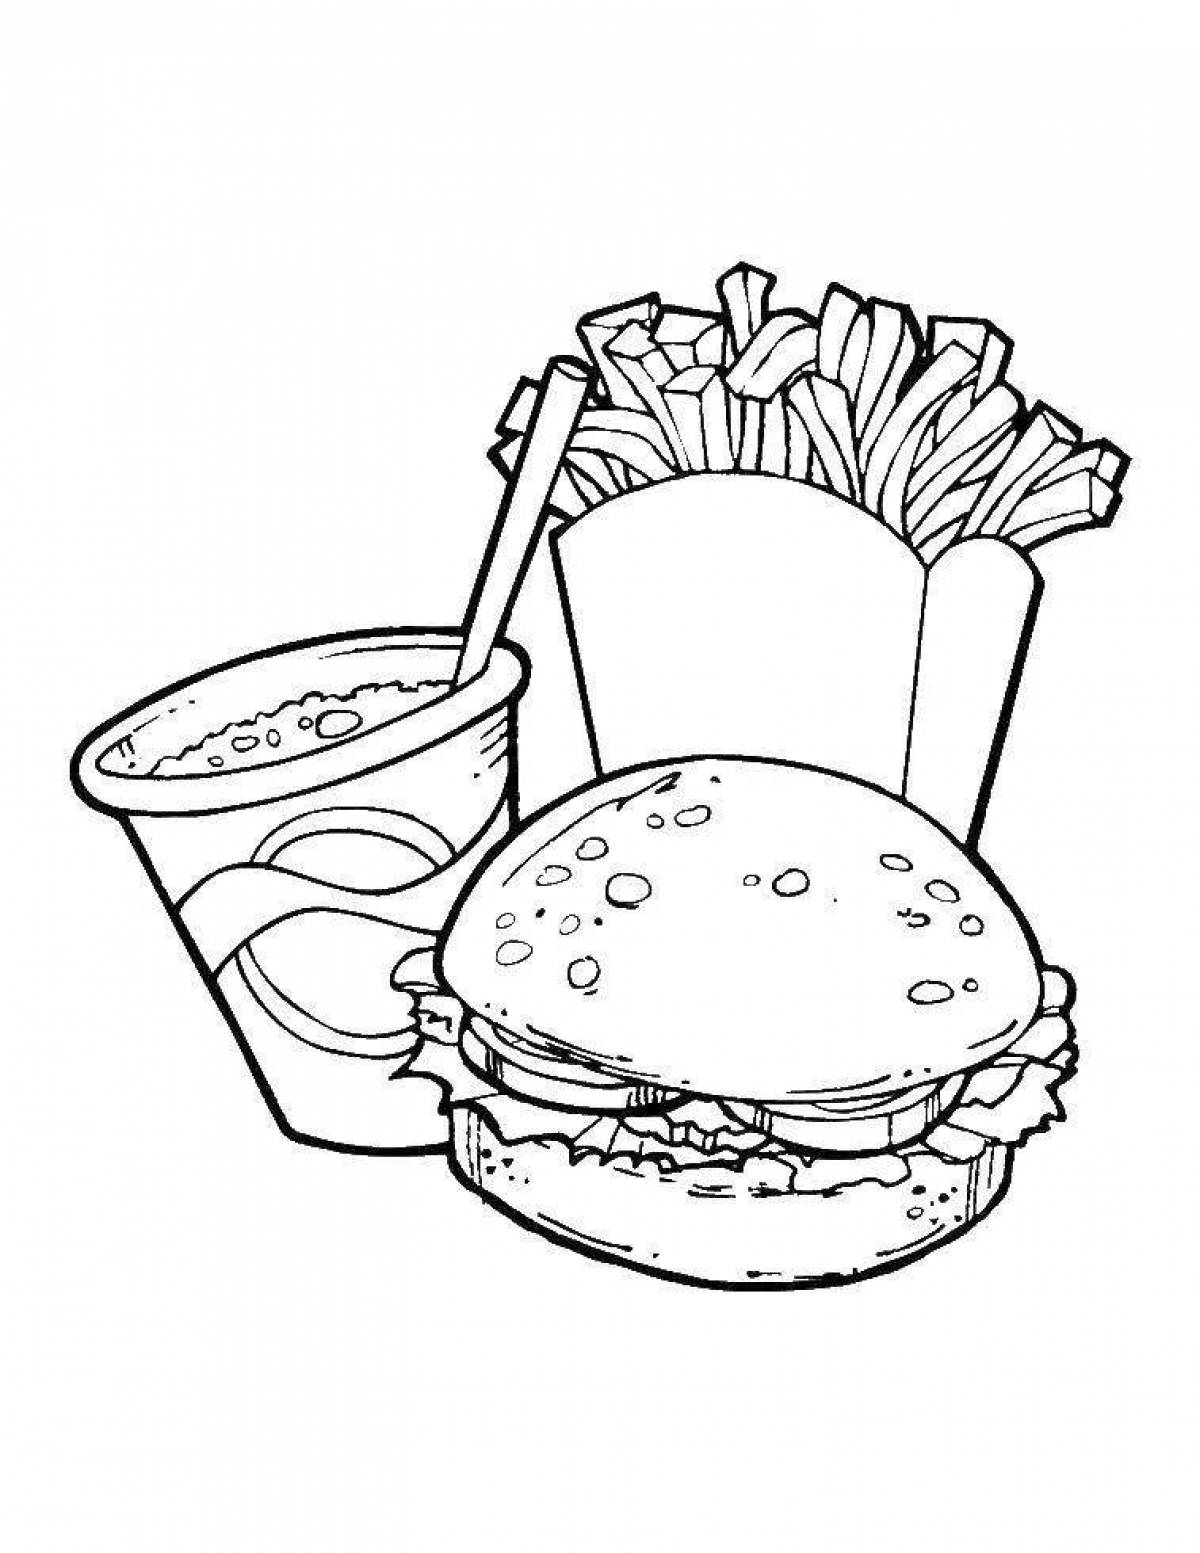 Burger and fries #6